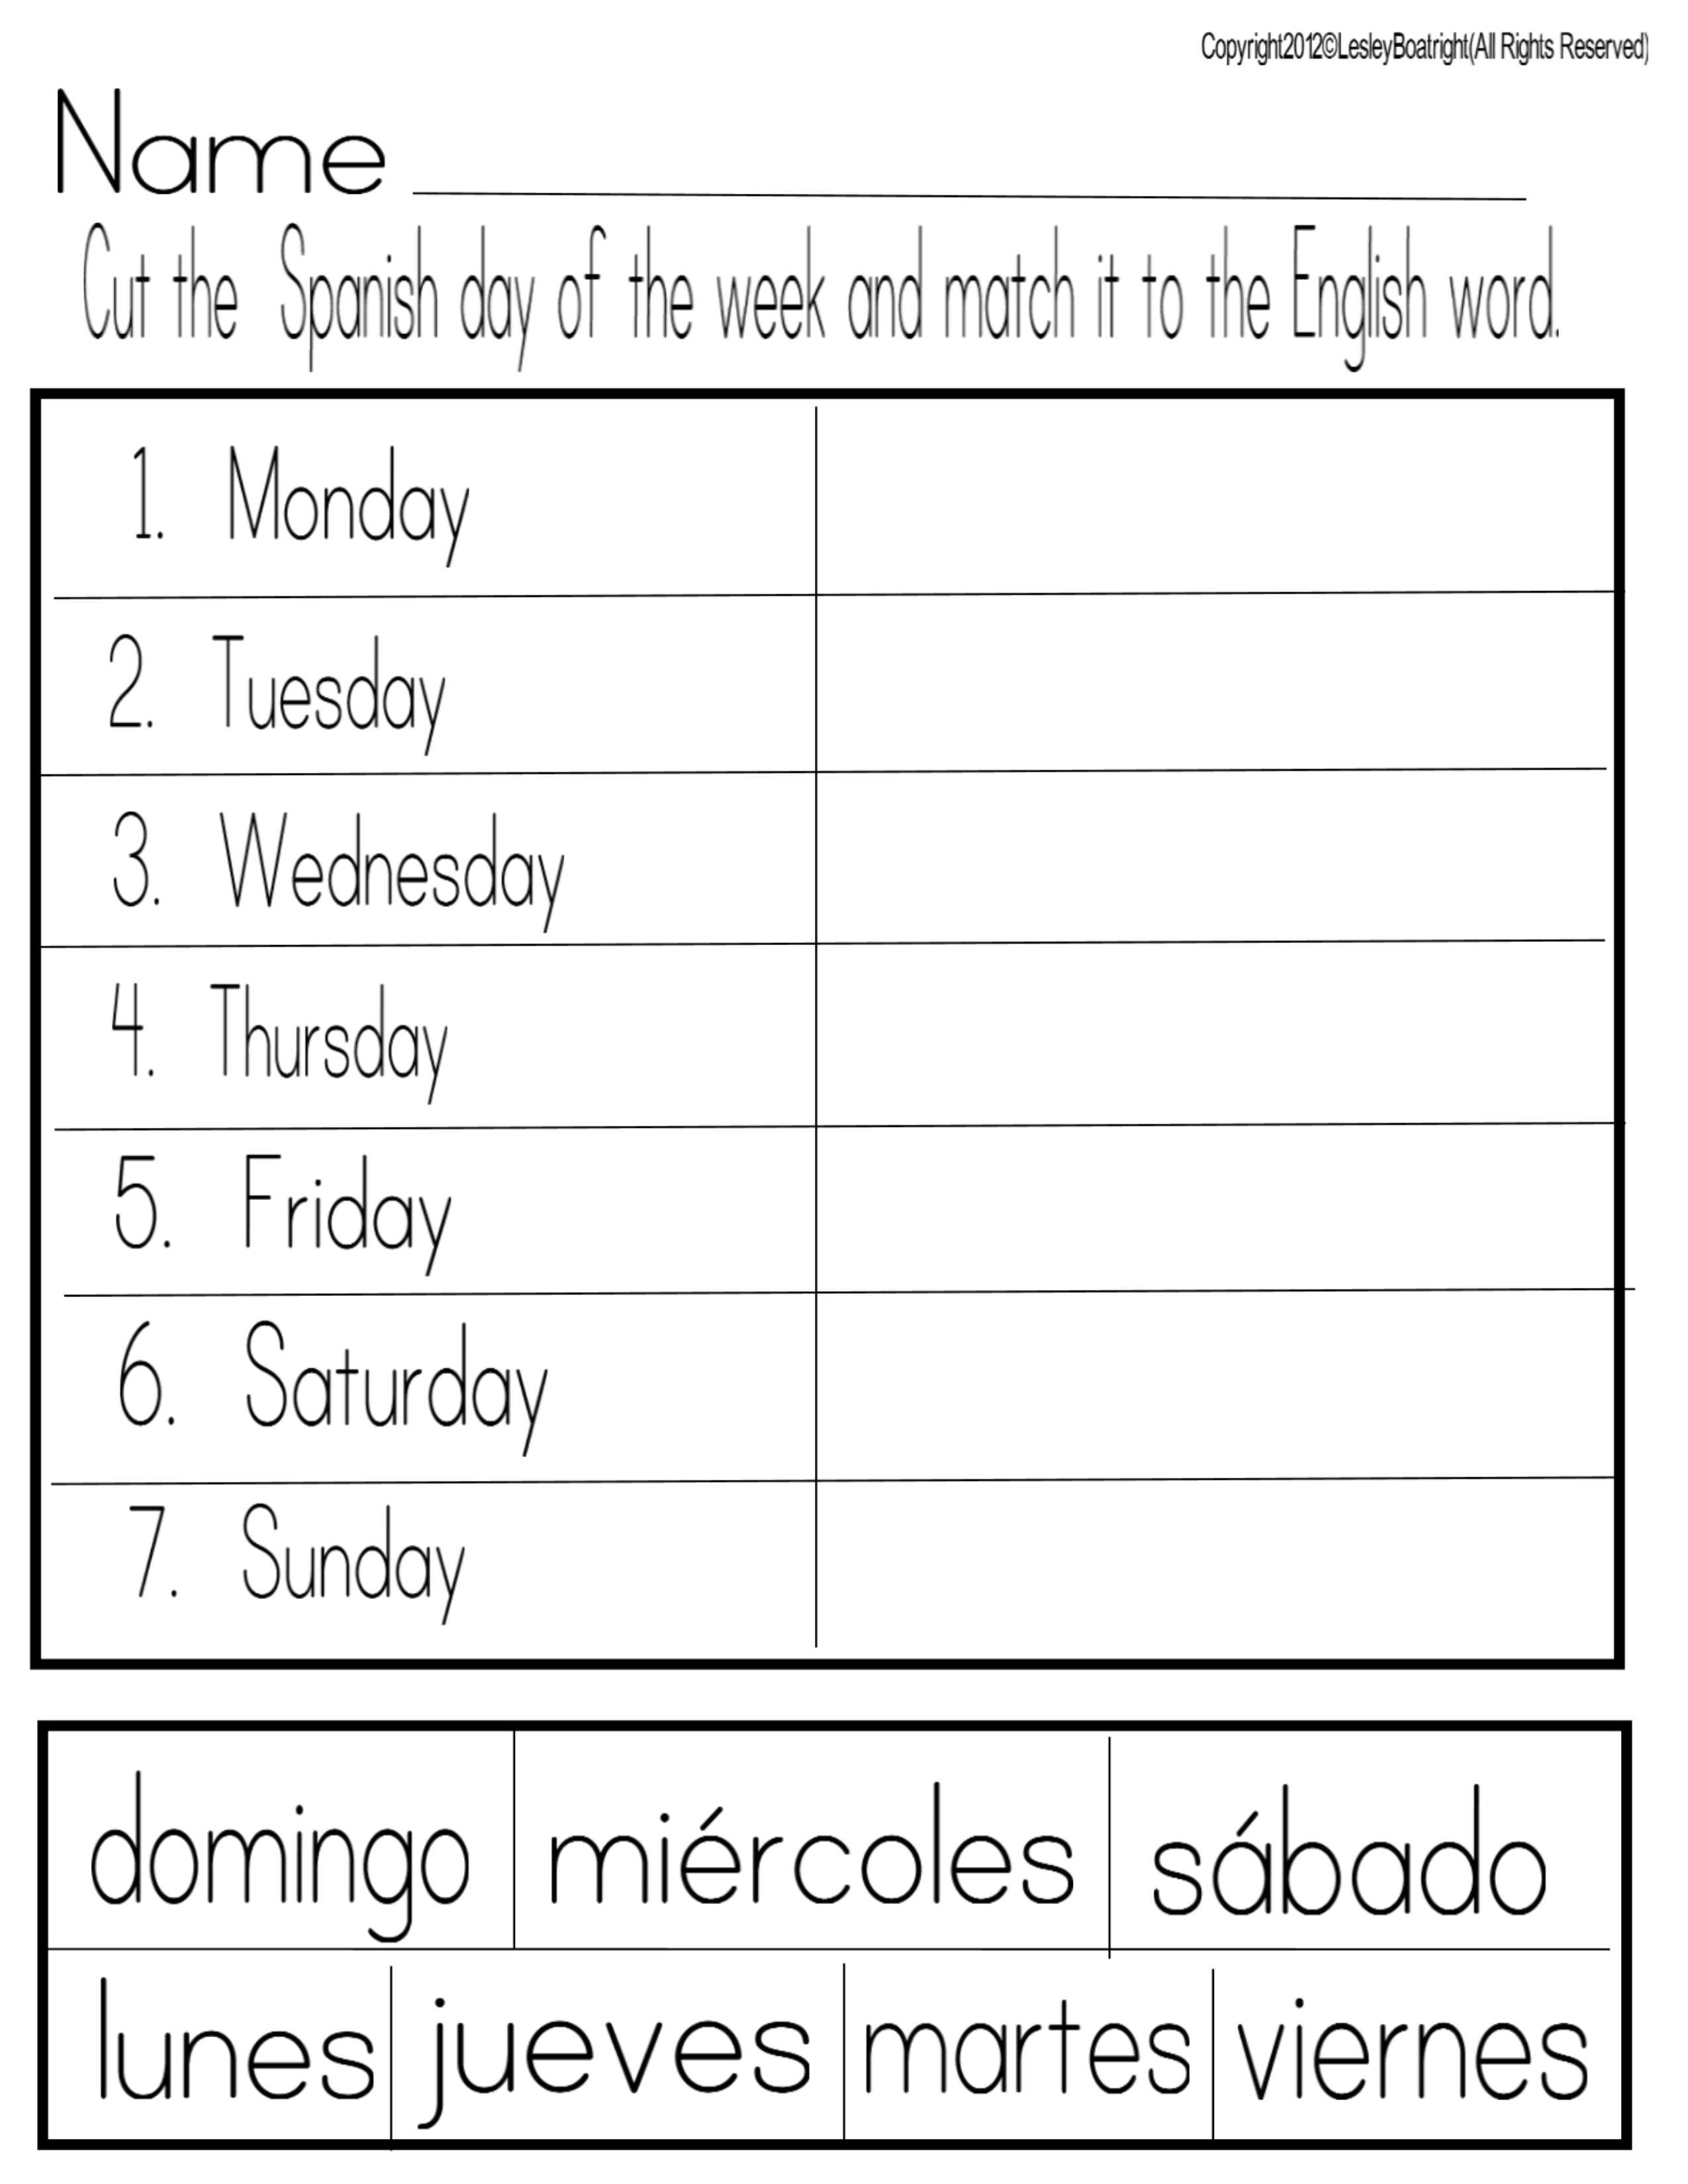 12 Best Images of Days Of The Week Spanish Worksheet Spanish Days of